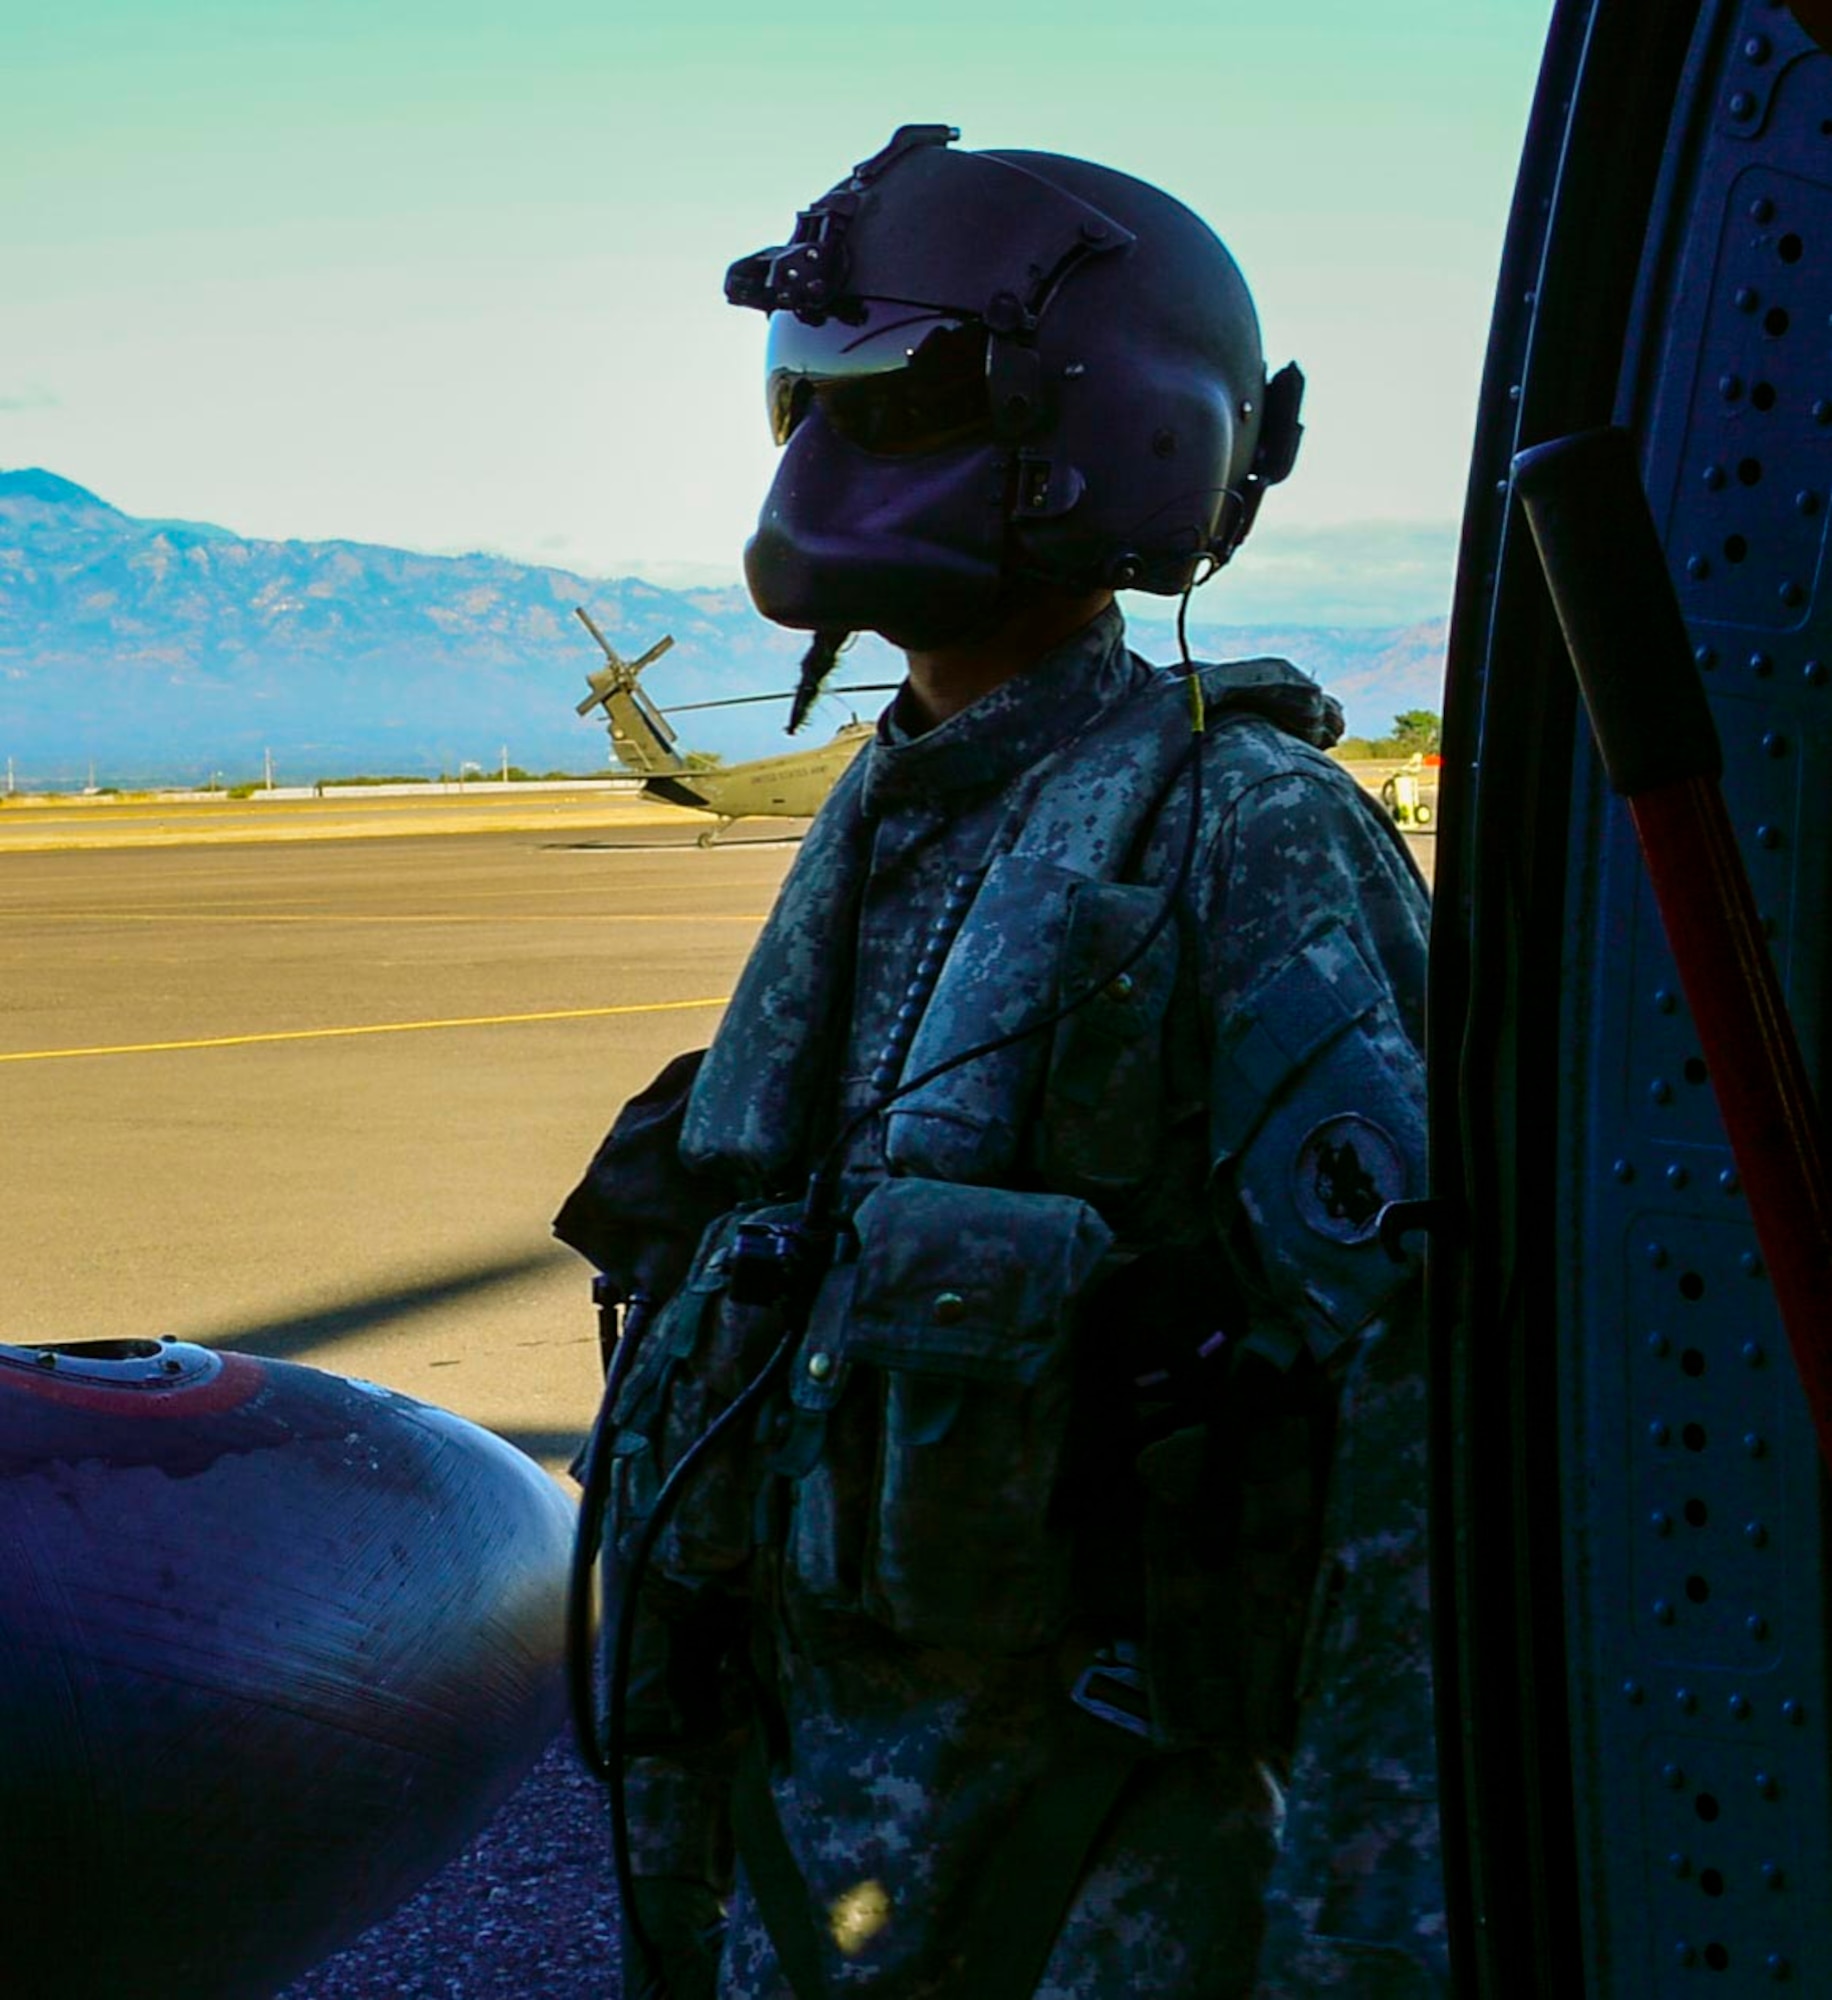 A U.S. Army crew chief assigned to the 1st Battalion, 228th Aviation Regiment starts pre-flight checks on a UH-60 Blackhawk helicopter for deck landing qualifications at Soto Cano Air Base, Honduras, Feb. 1, 2015.  The 1-228th Avn. Reg. aircrew participated in deck landing qualifications on board the USS Kauffman to qualify pilots and crew chiefs on shipboard operations.   Kauffman is on its final scheduled deployment to the U.S. Southern Command area of responsibility supporting multinational, counter-narcotics operation known as Operation Martillo. (U.S. Air Force photo/Tech. Sgt. Heather Redman)